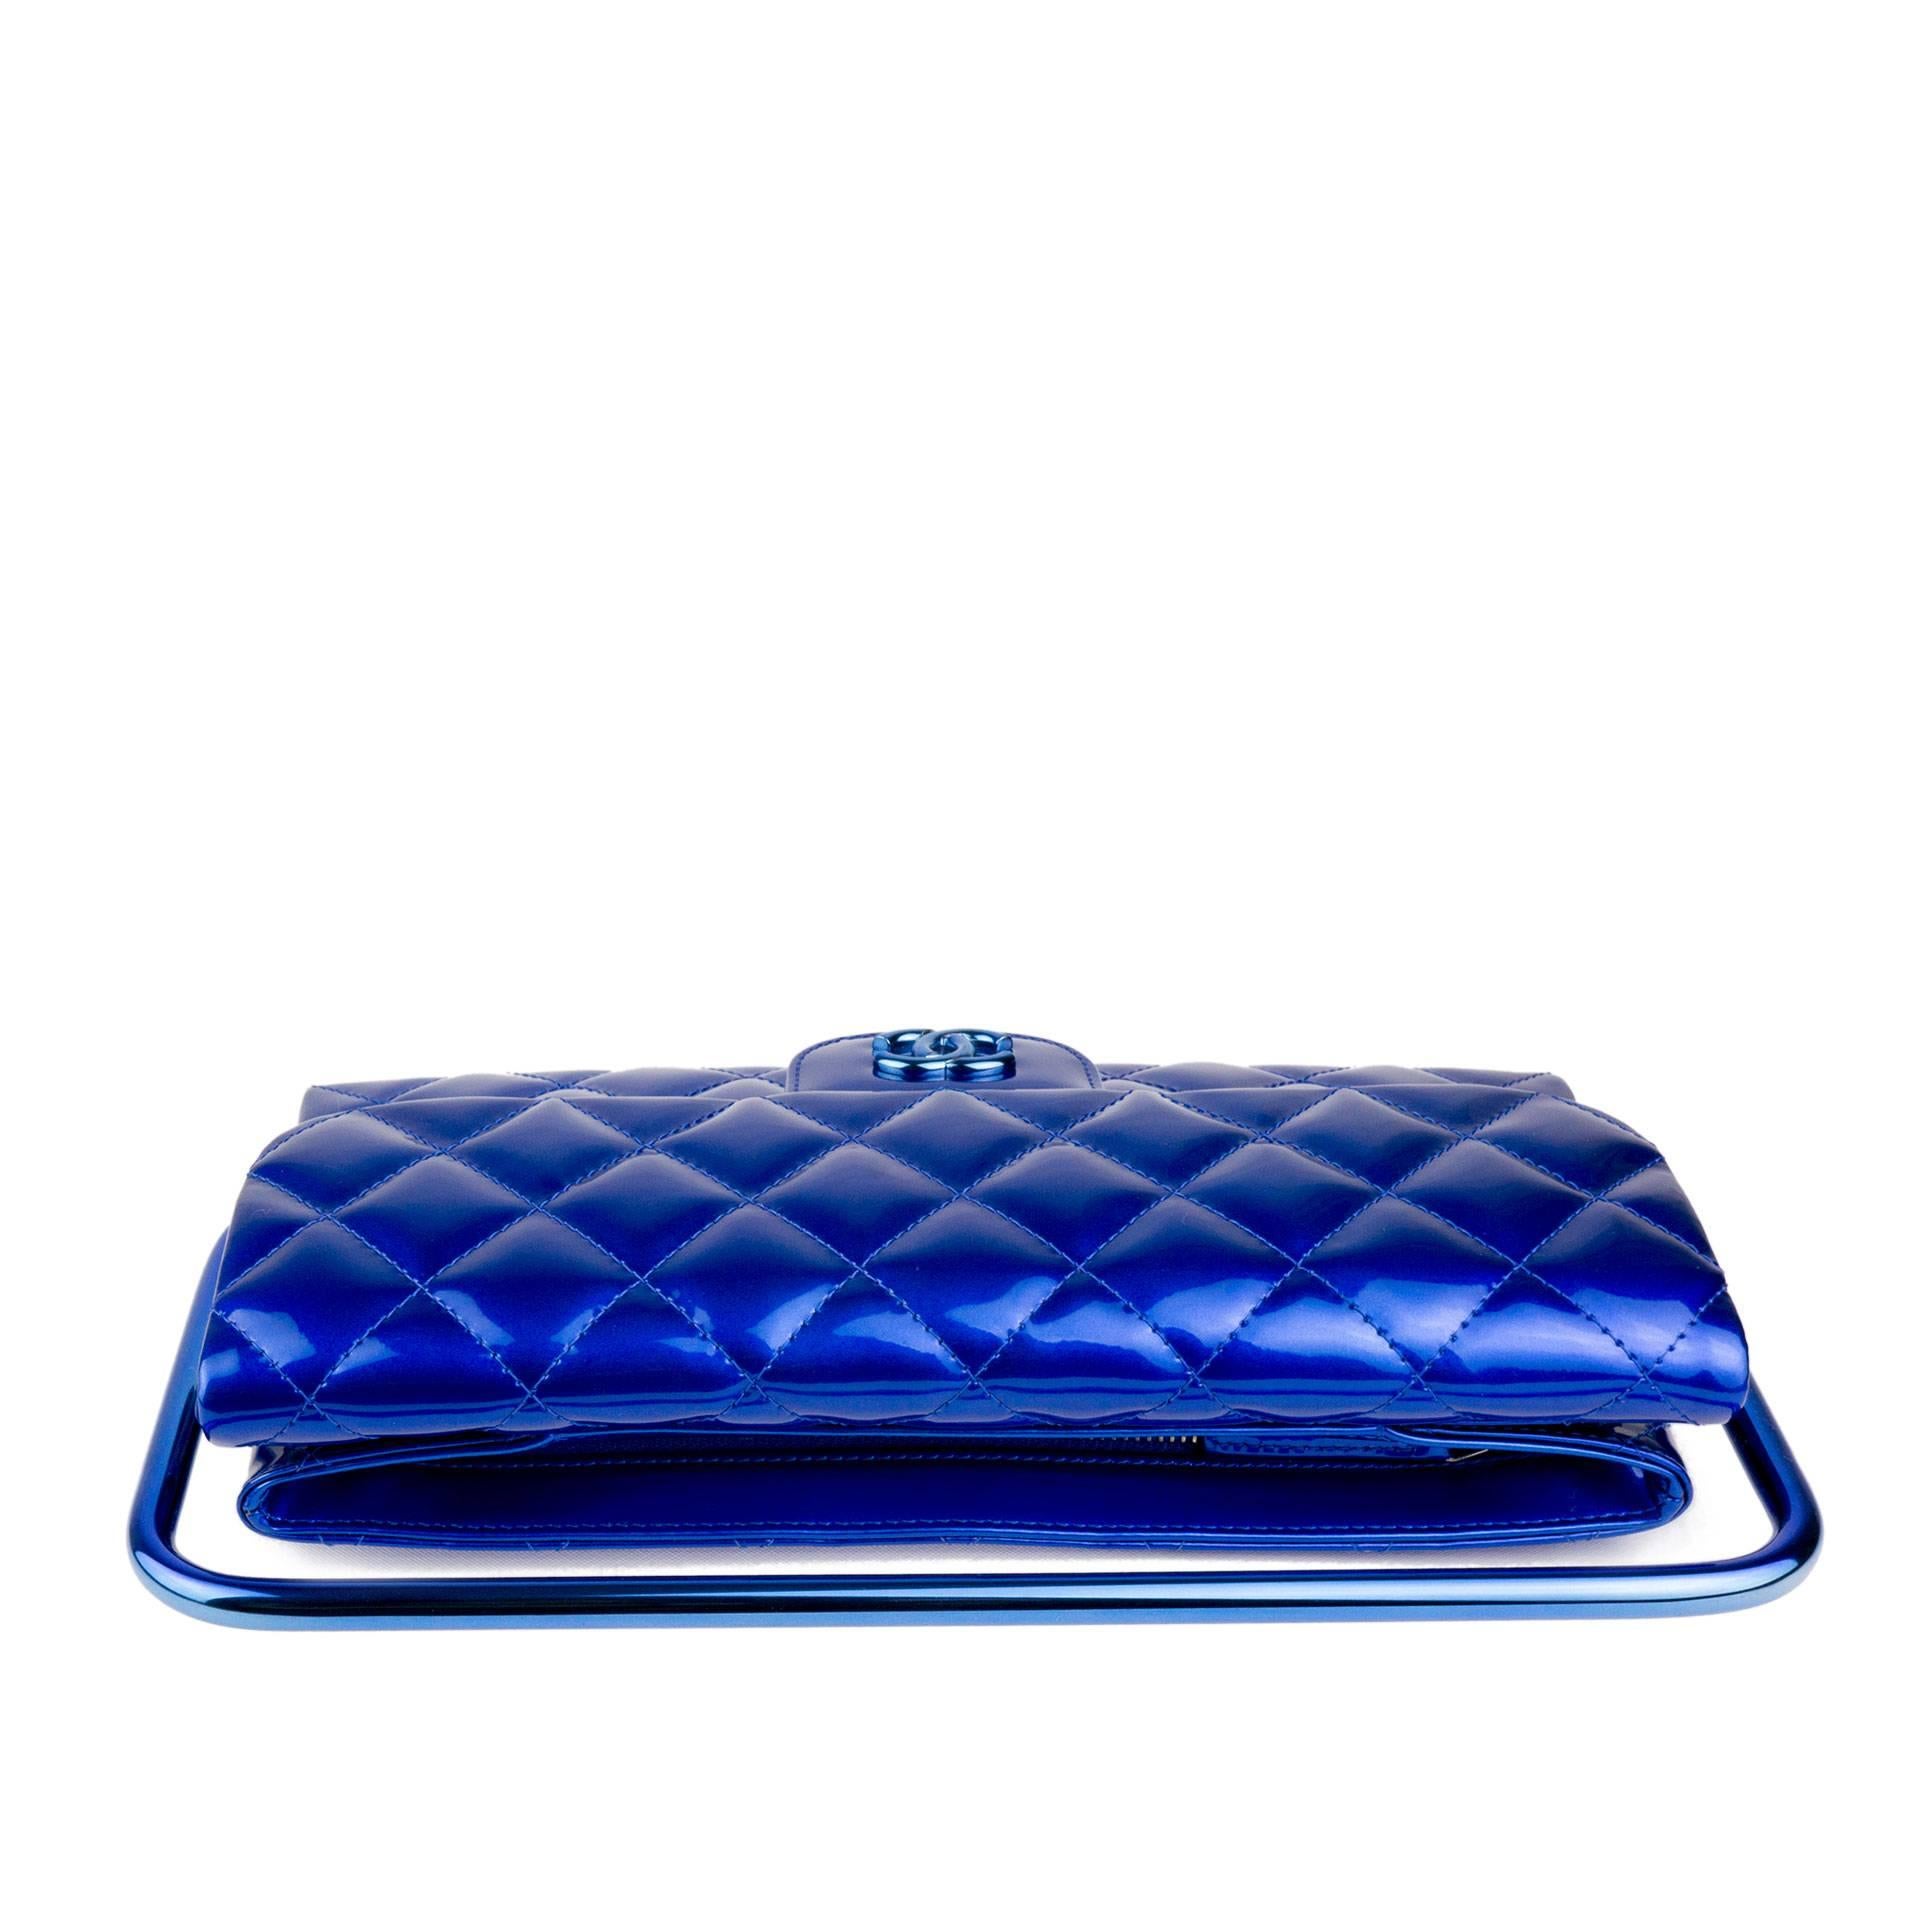 Chanel 2014 Electric Blue Patent Leather Quilted Retractable Frame Clutch Bag For Sale 5